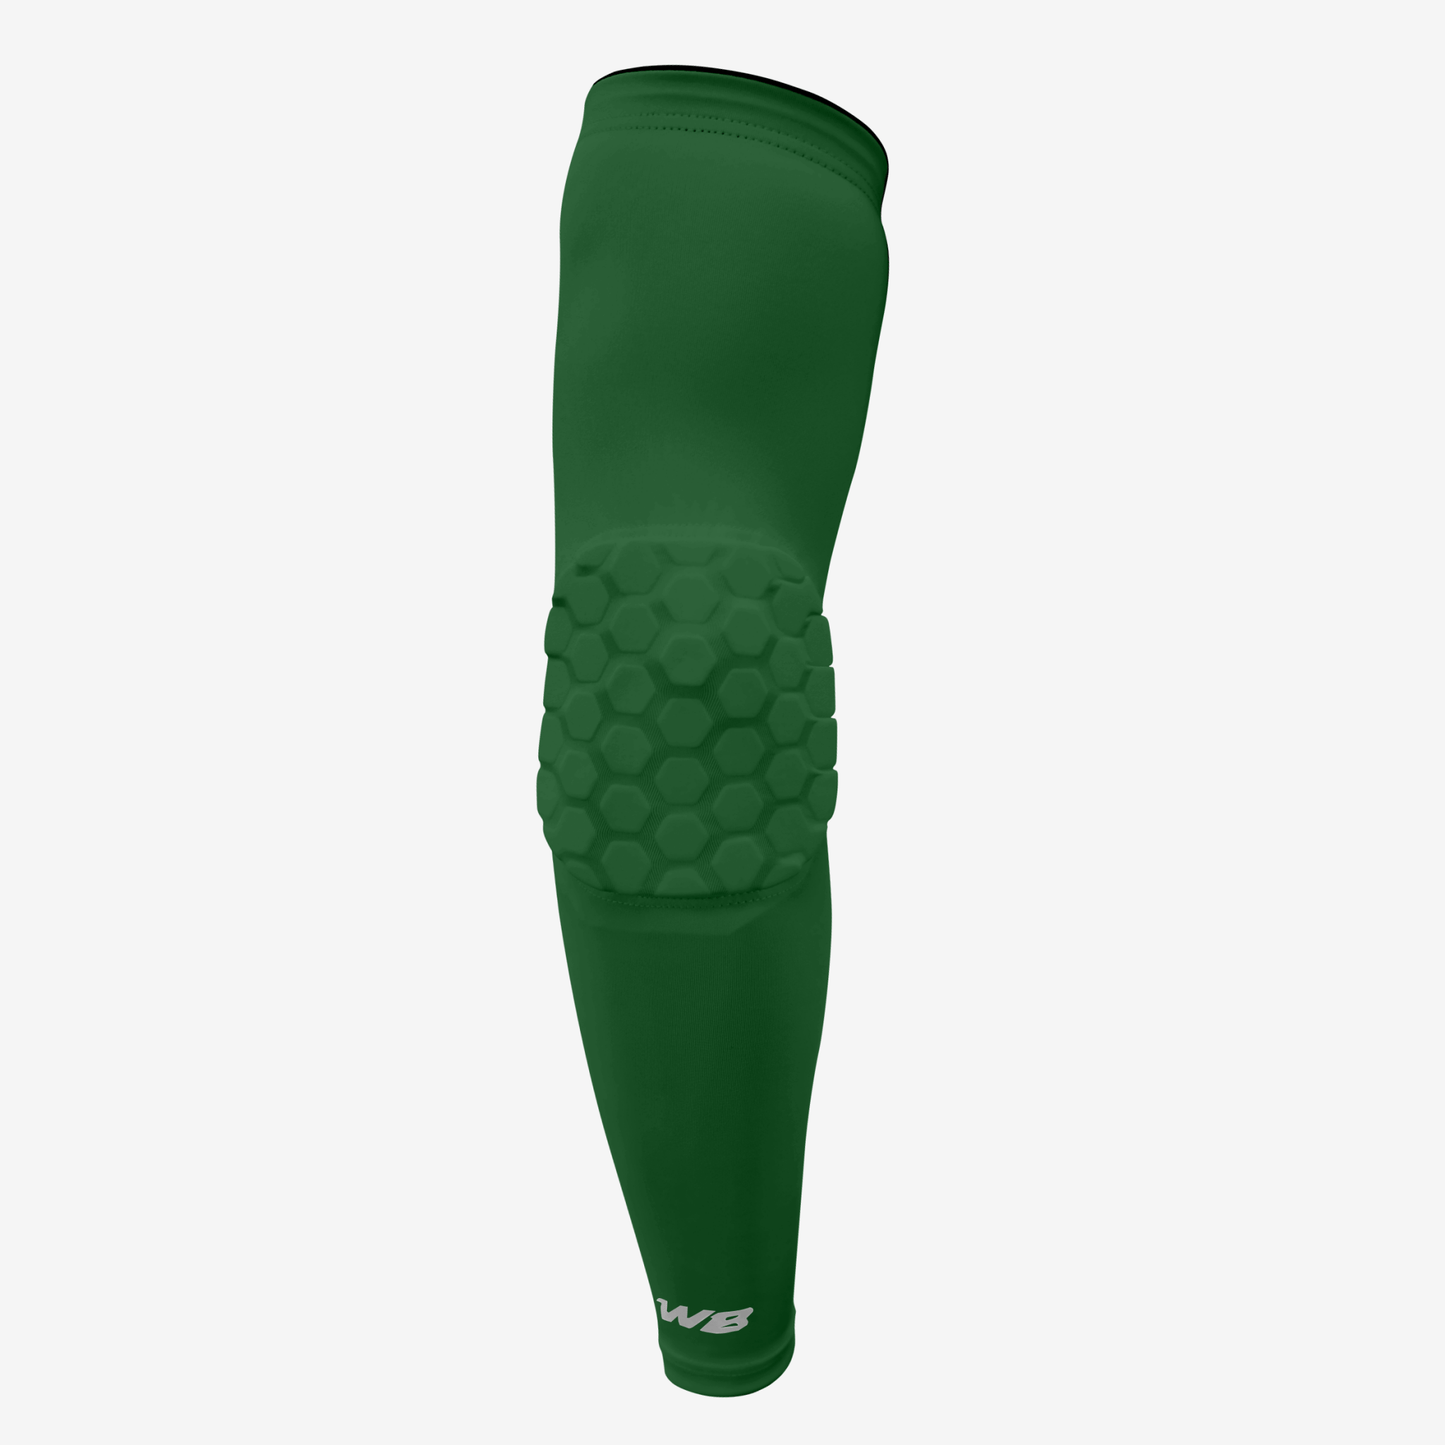 PADDED ARM SLEEVE (FOREST GREEN) - We Ball Sports